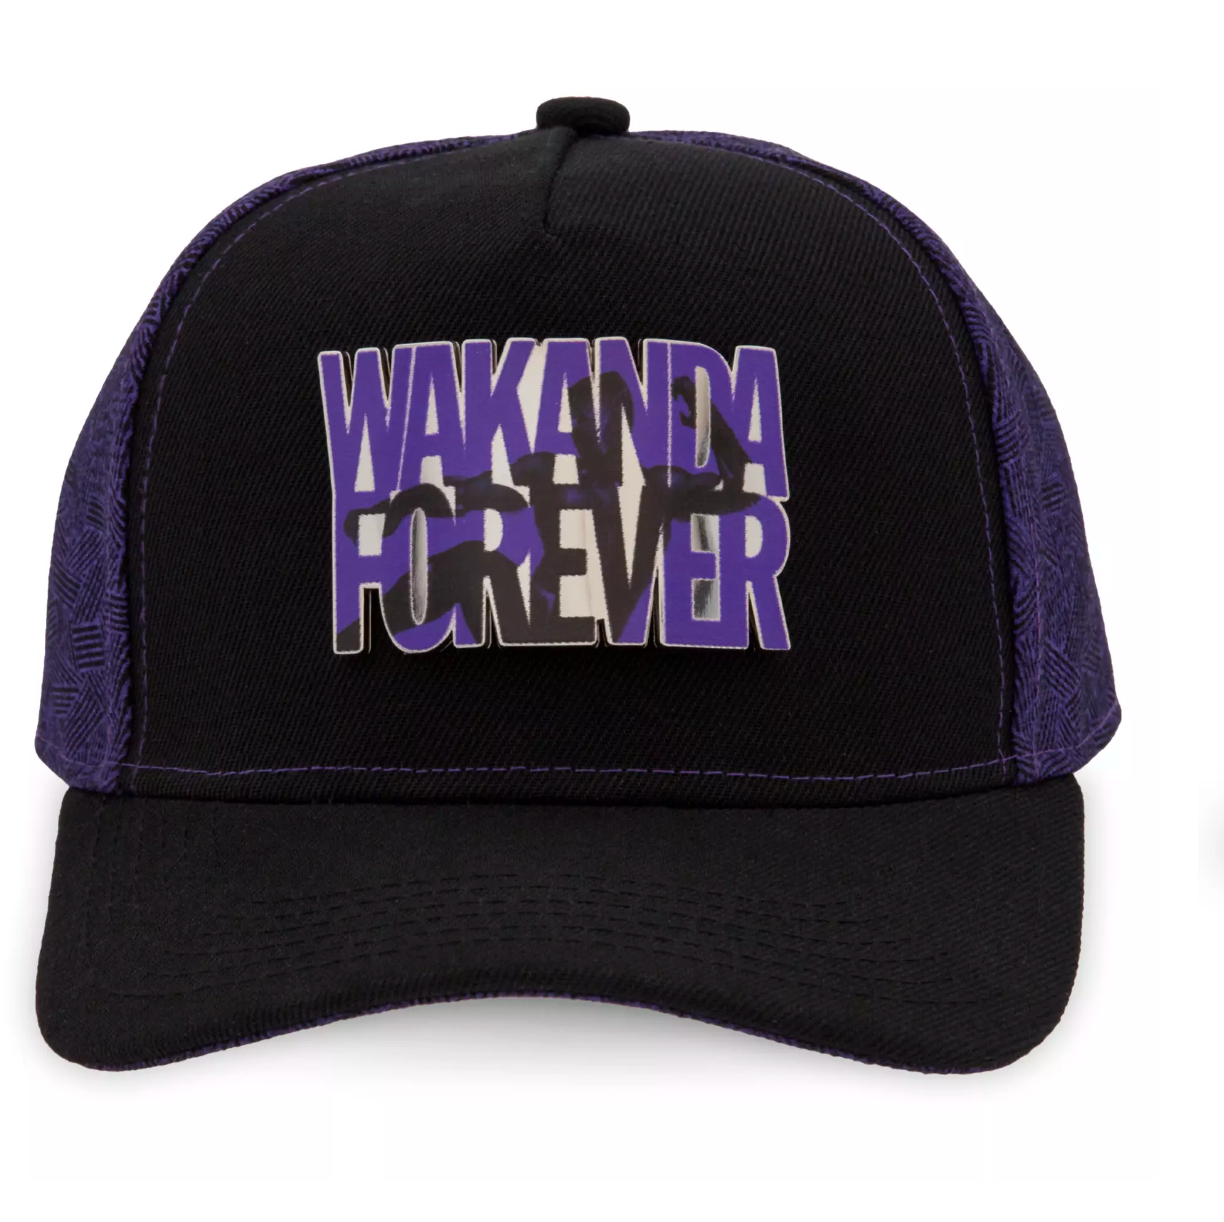 Disney Parks Black Panther Wakanda Forever Baseball Cap for Adults New with Tag